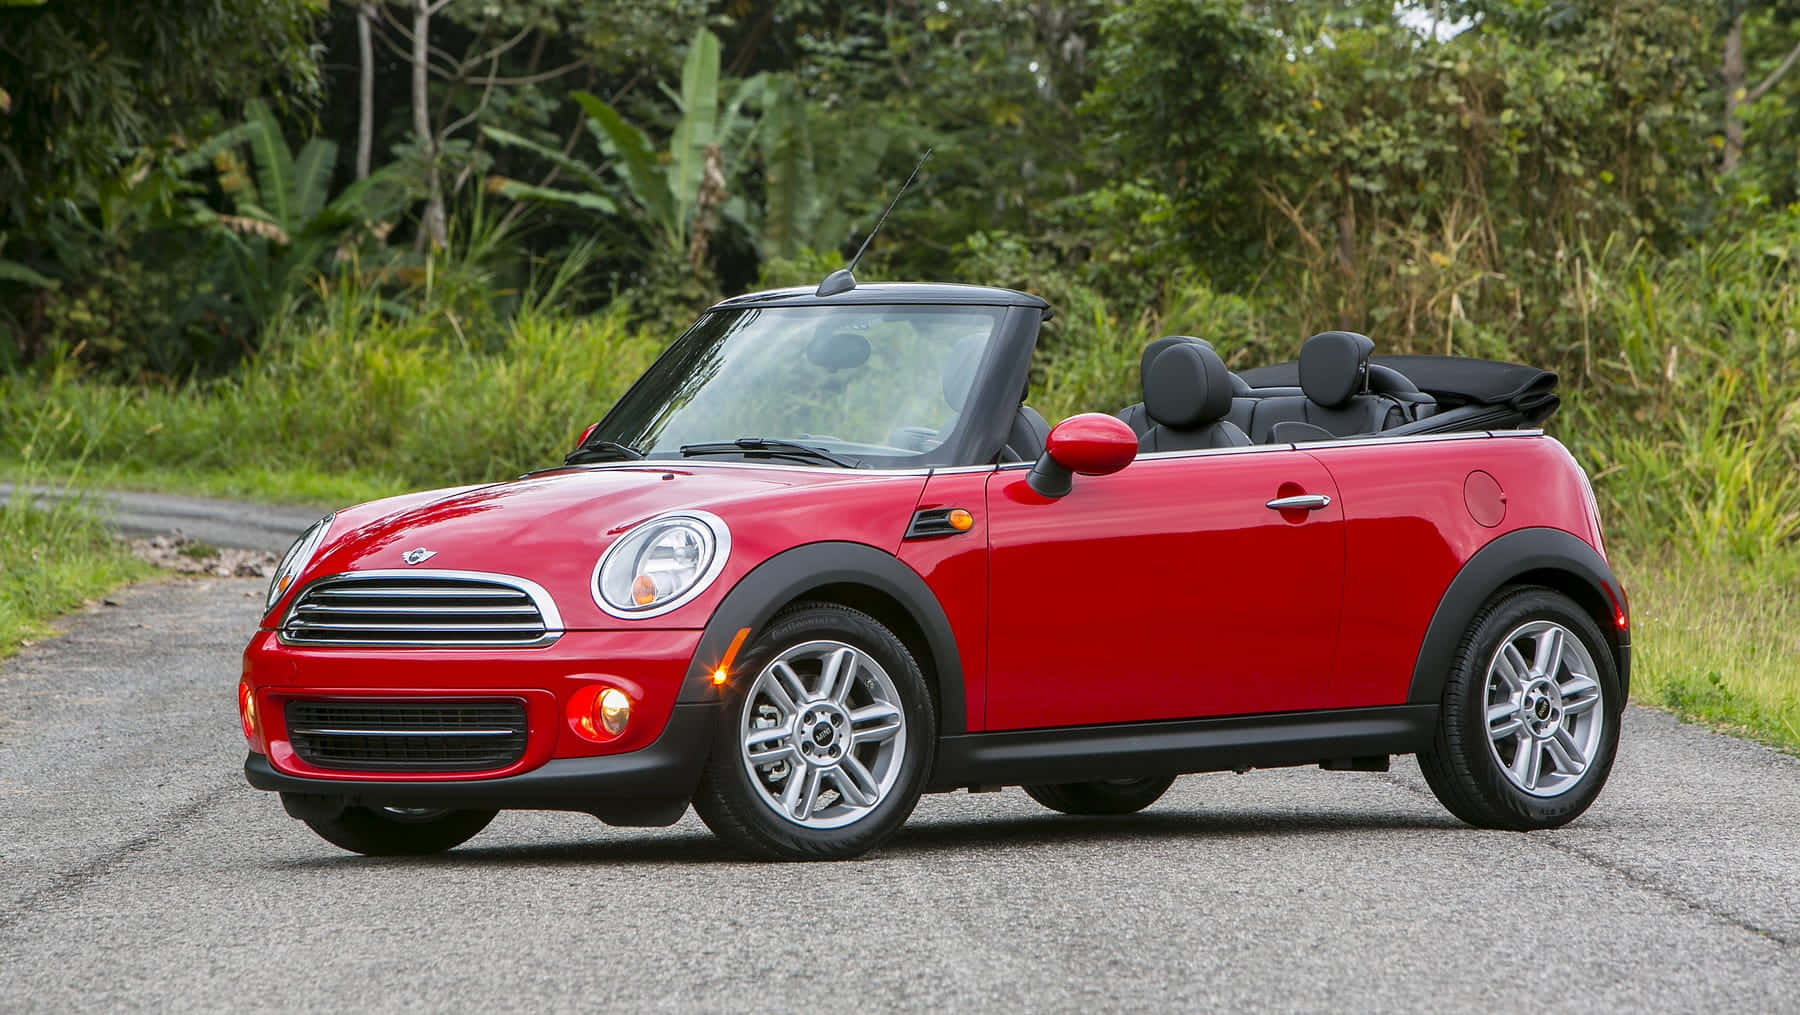 Stylish Mini Cooper Convertible in action Wallpaper